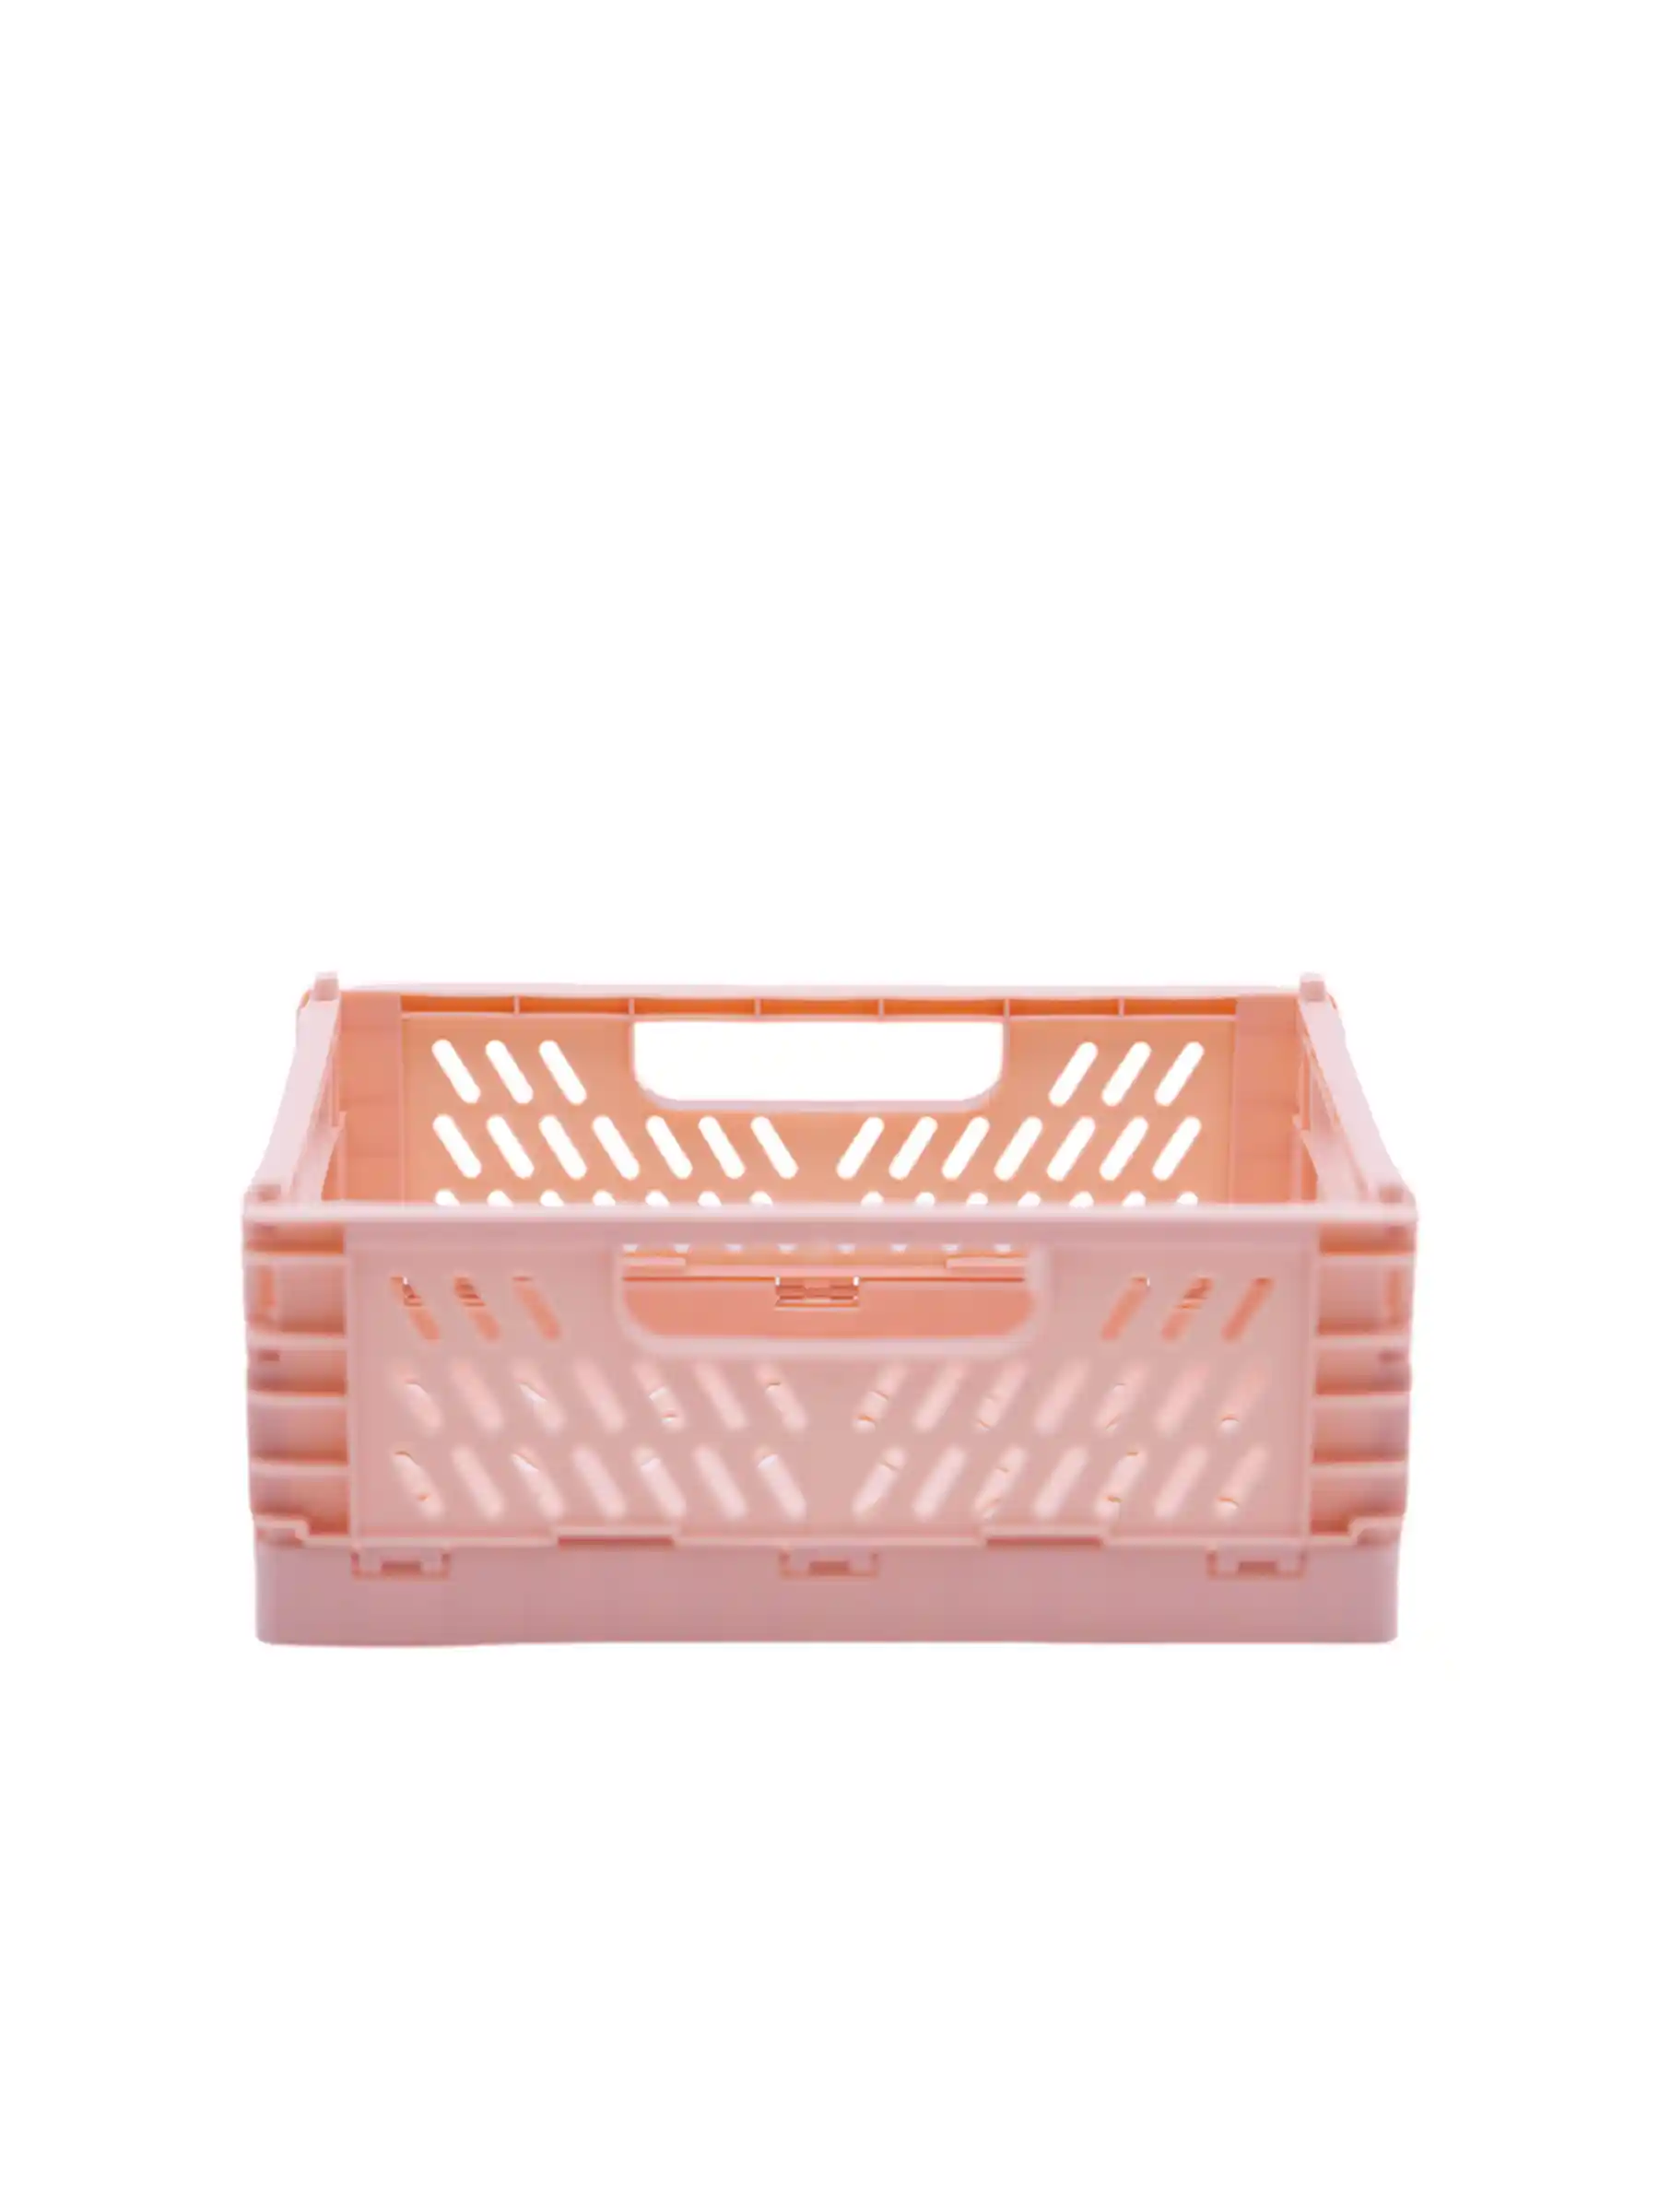 This is an expanded pink plastic foldable organization basket